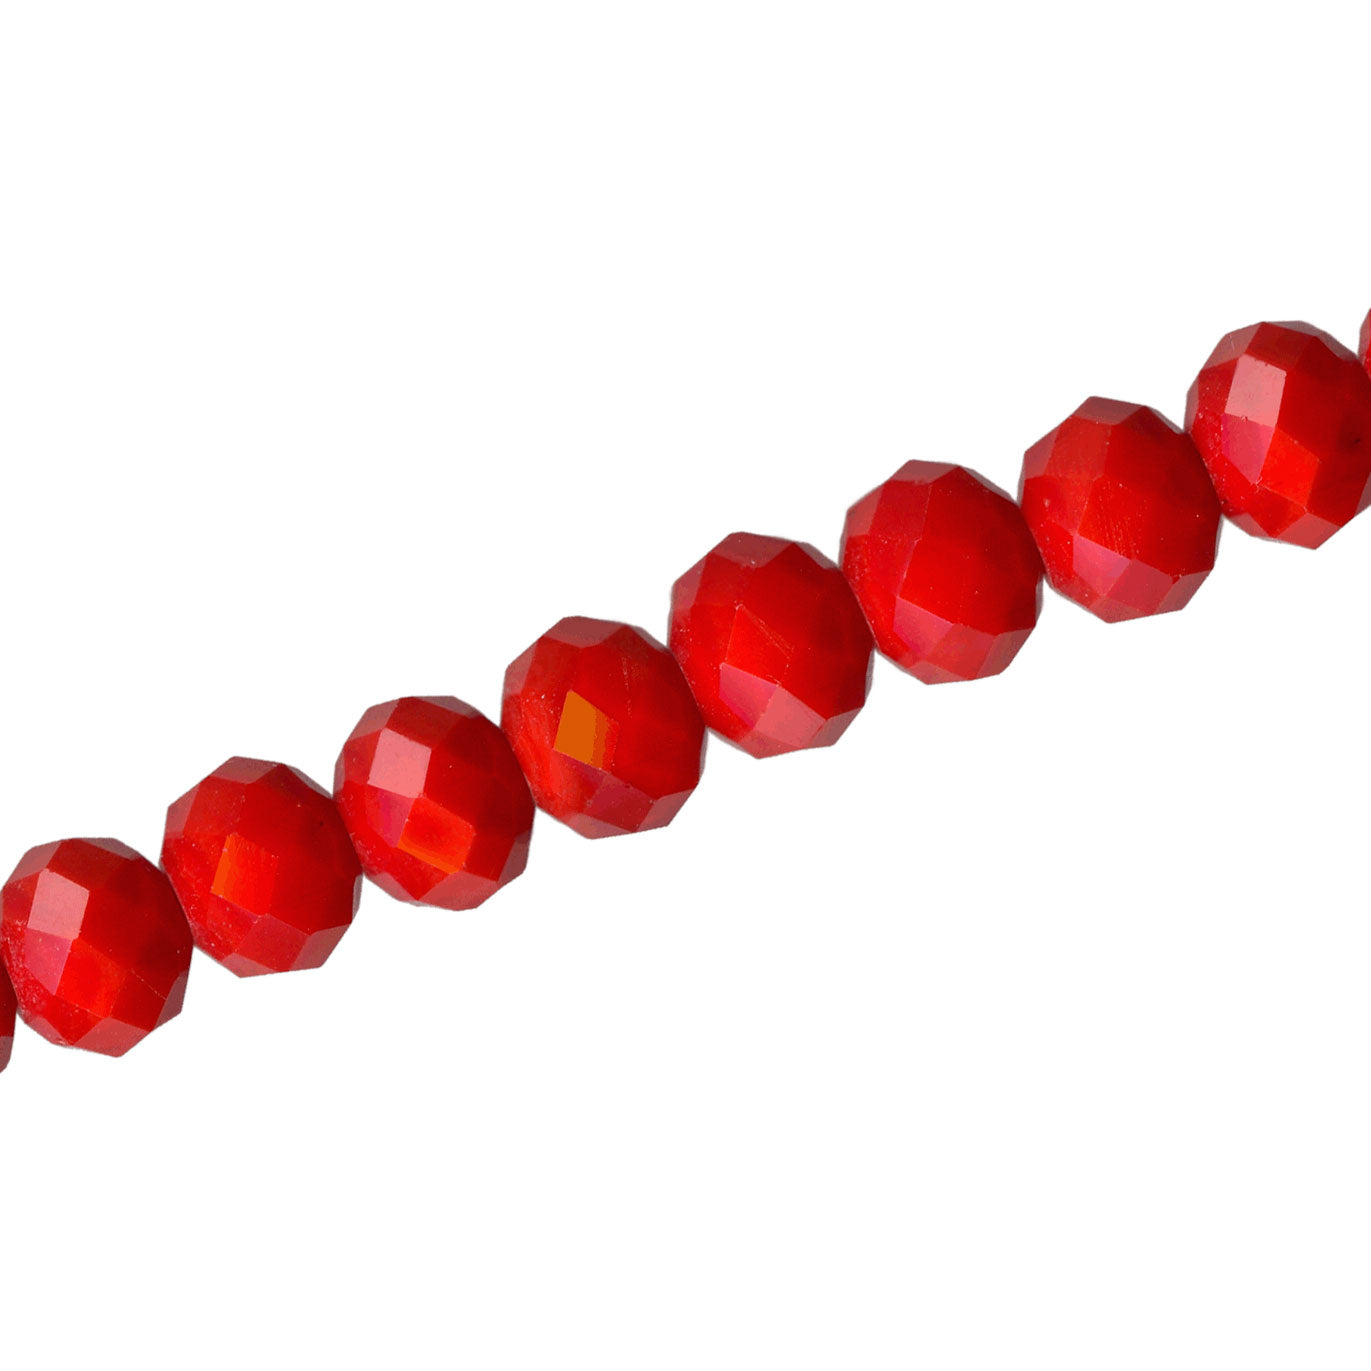 10 X 8 MM CRYSTAL RONDELLE BEADS OPAQUE RED AB - APPROX 72 / PCS